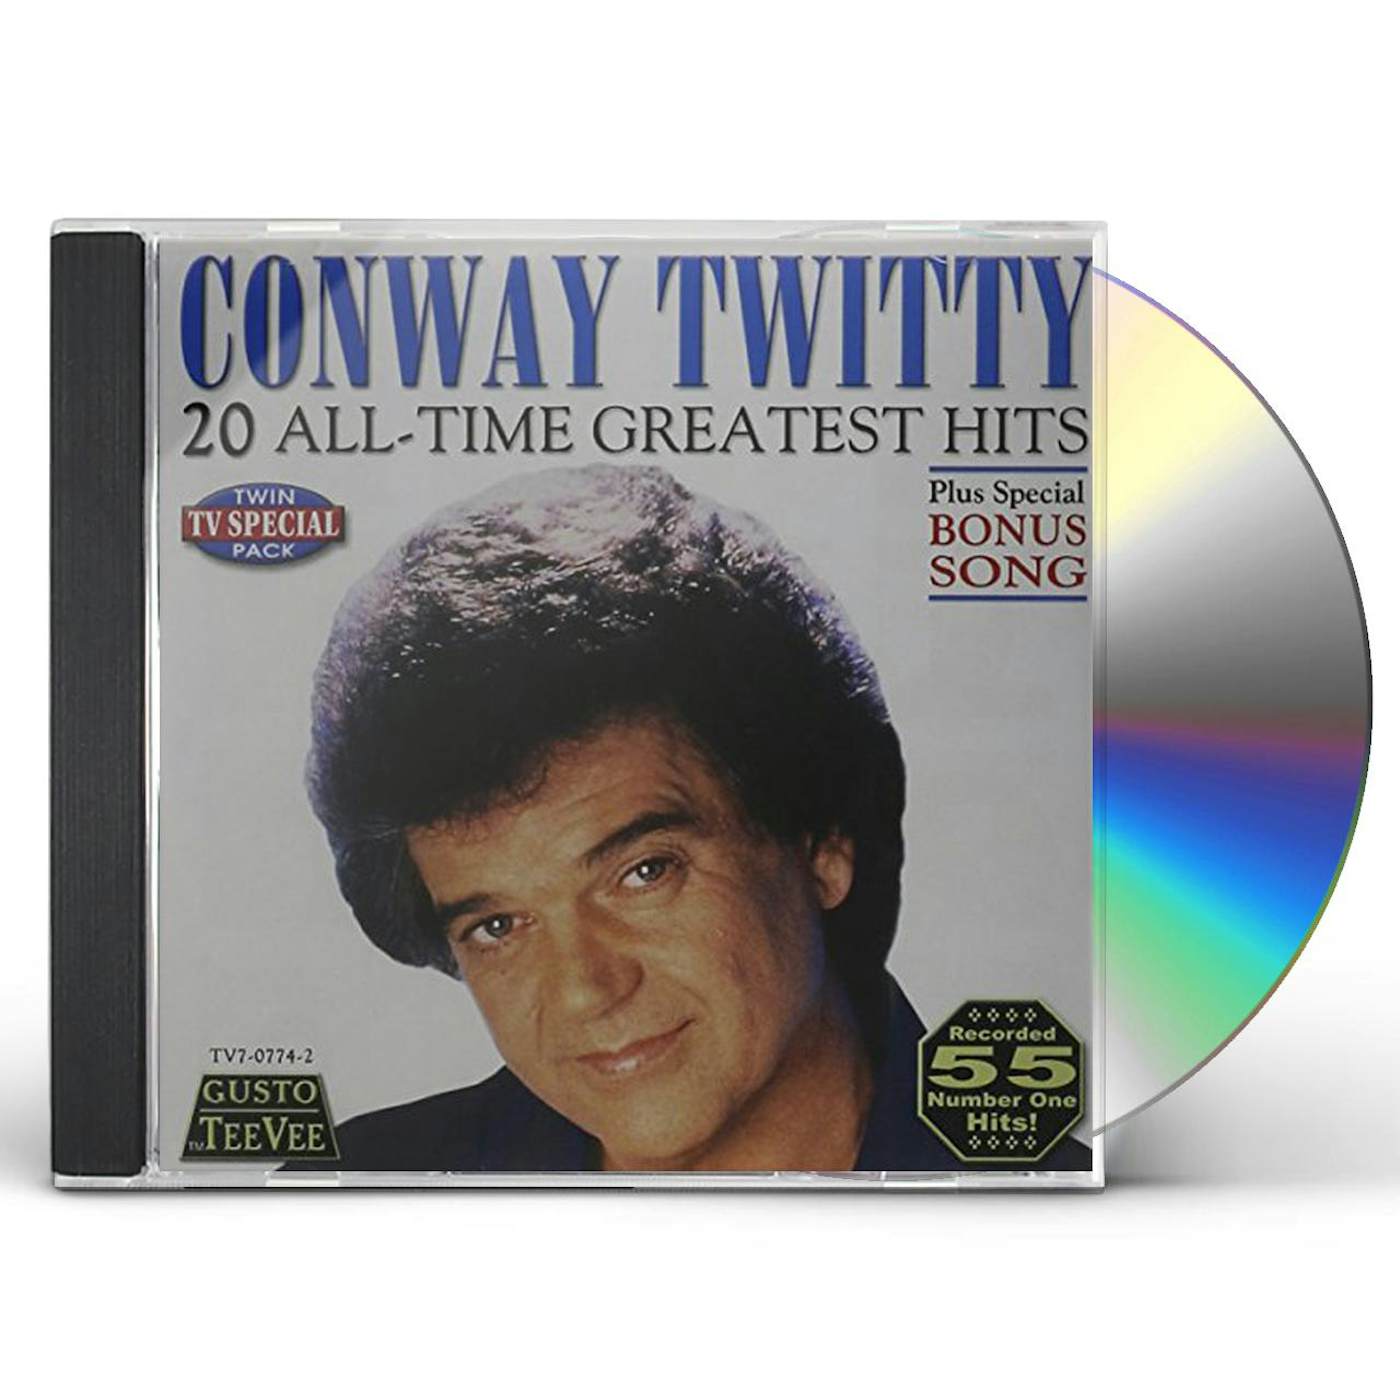 Conway Twitty 20 ALL TIME GREATEST HITS CD